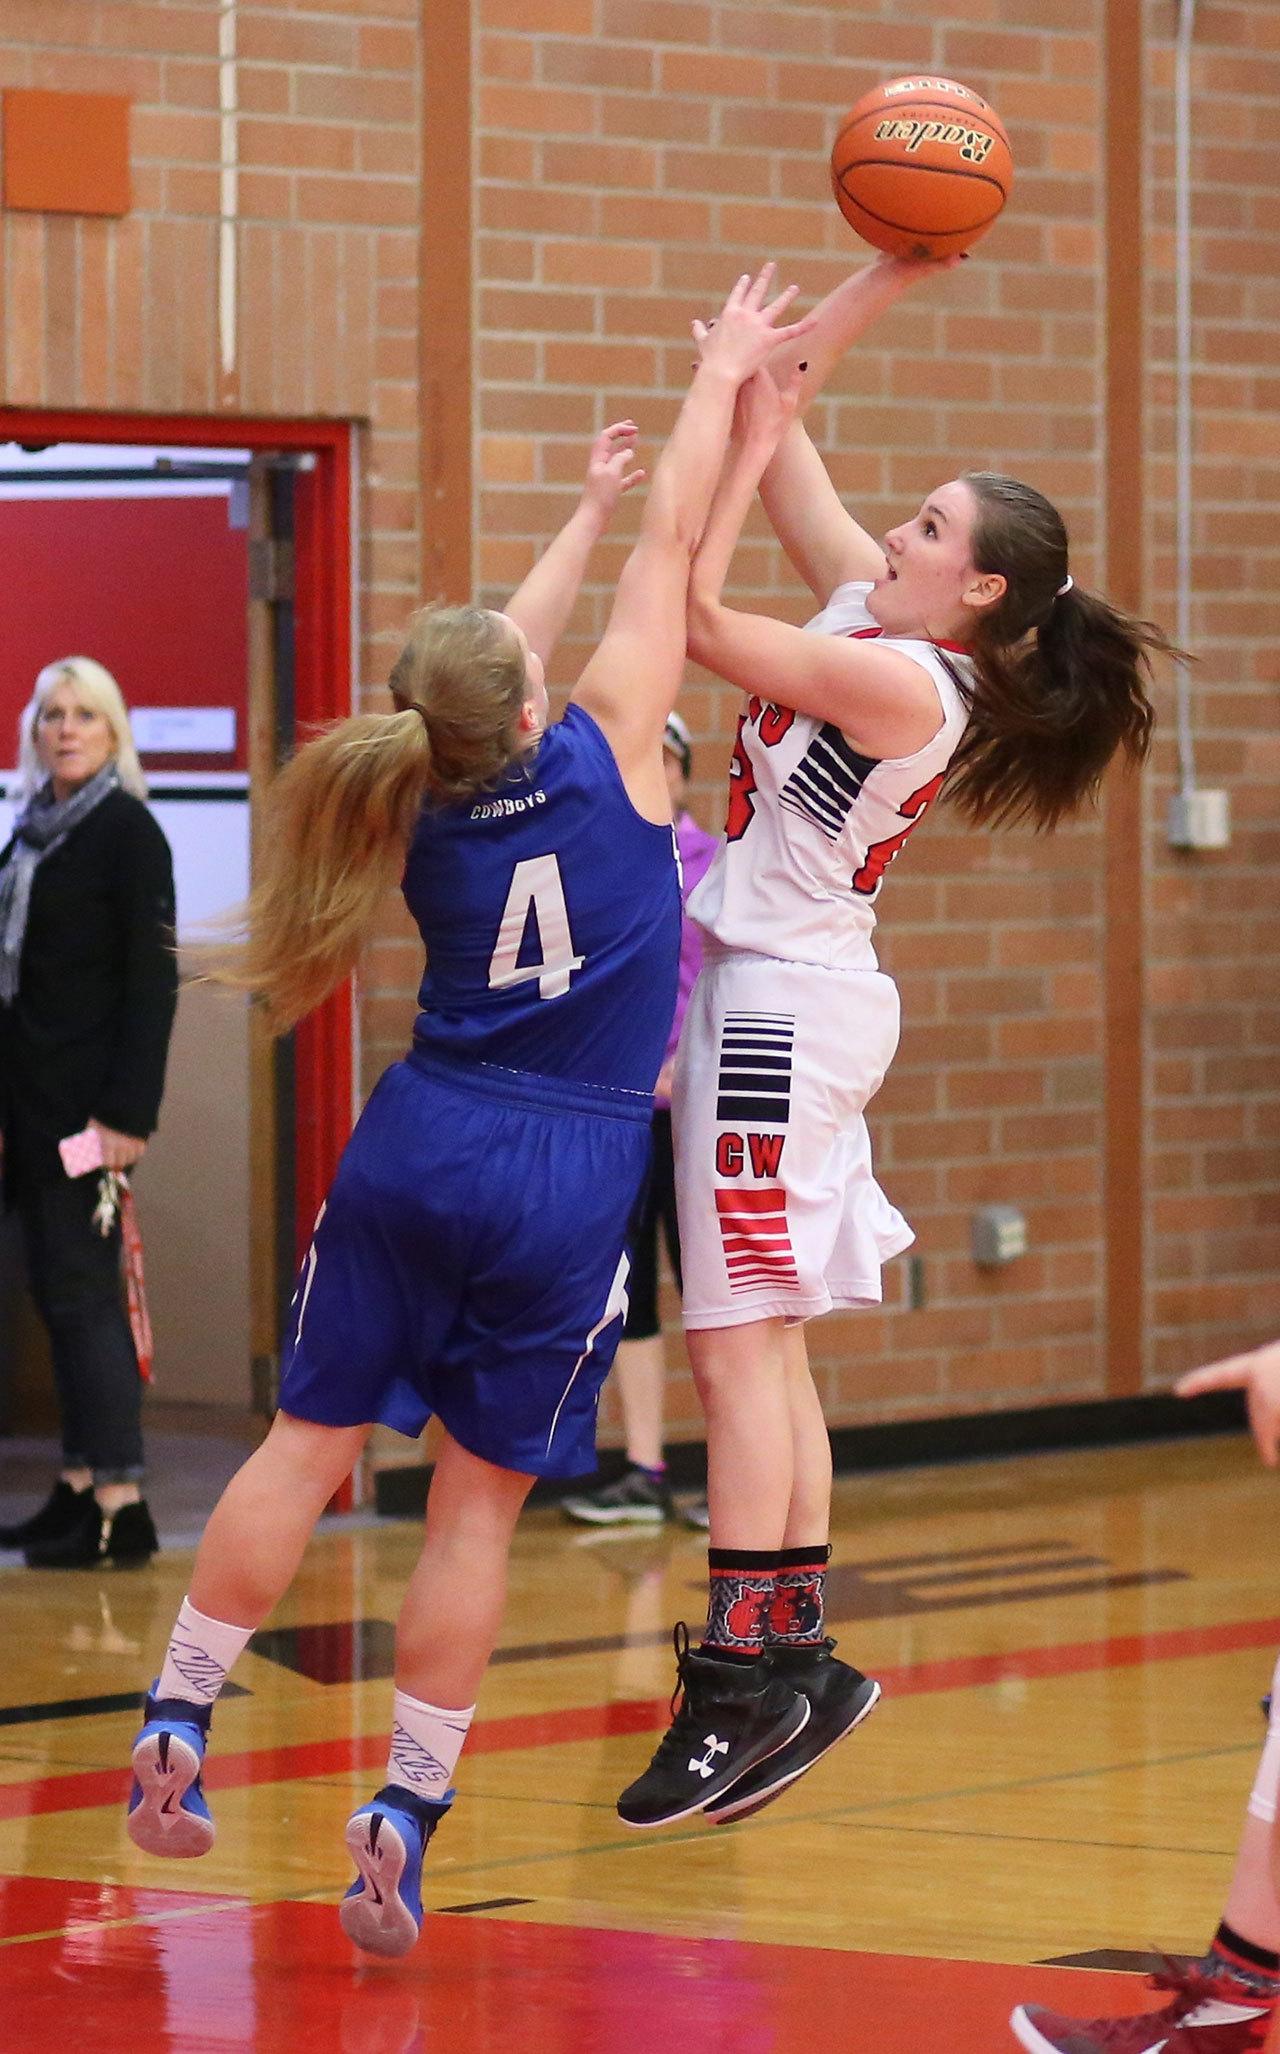 Mikayla Elfrank puts up a shot for Coupeville in Wednesday’s win over Chimacum. (Photo by John Fisken)